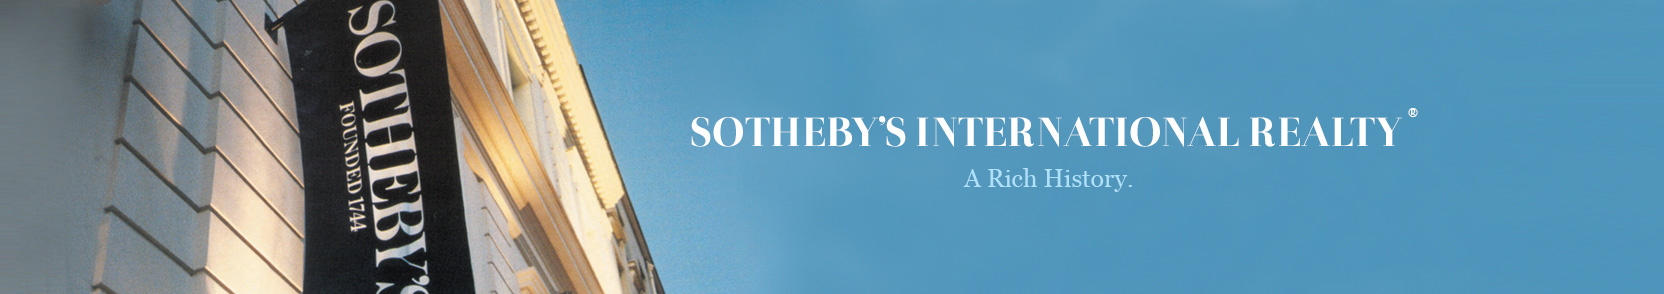 Sotheby's International Realty: A Rich History